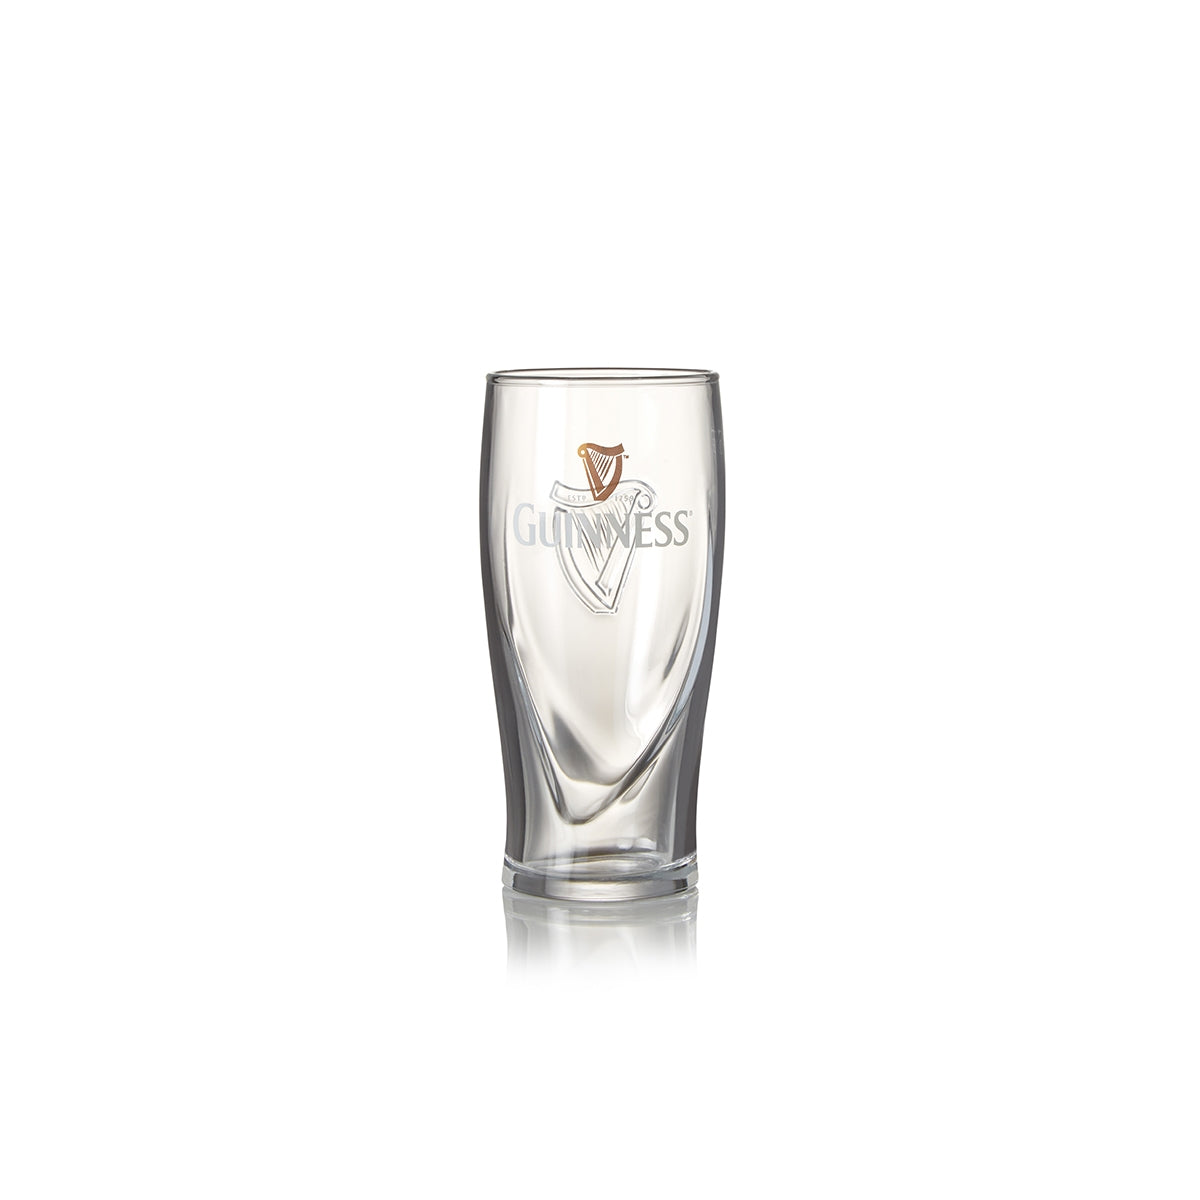 A Guinness Half Pint Glass 2 Pack on a white background.